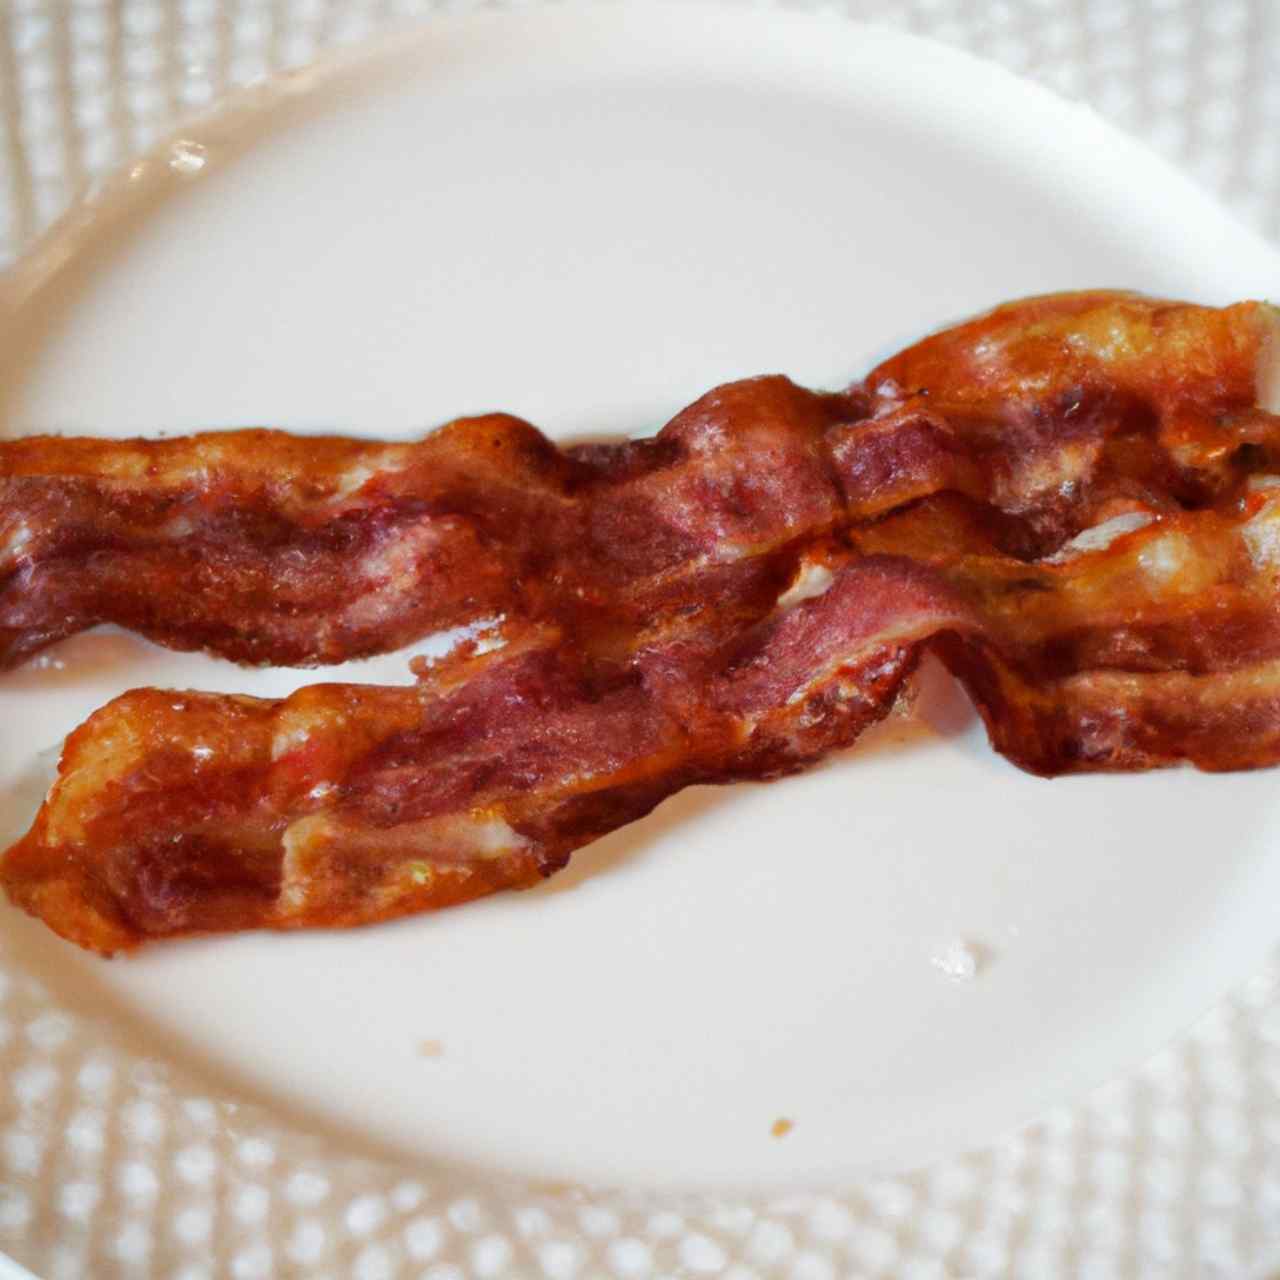 How To Tell When Bacon is Done